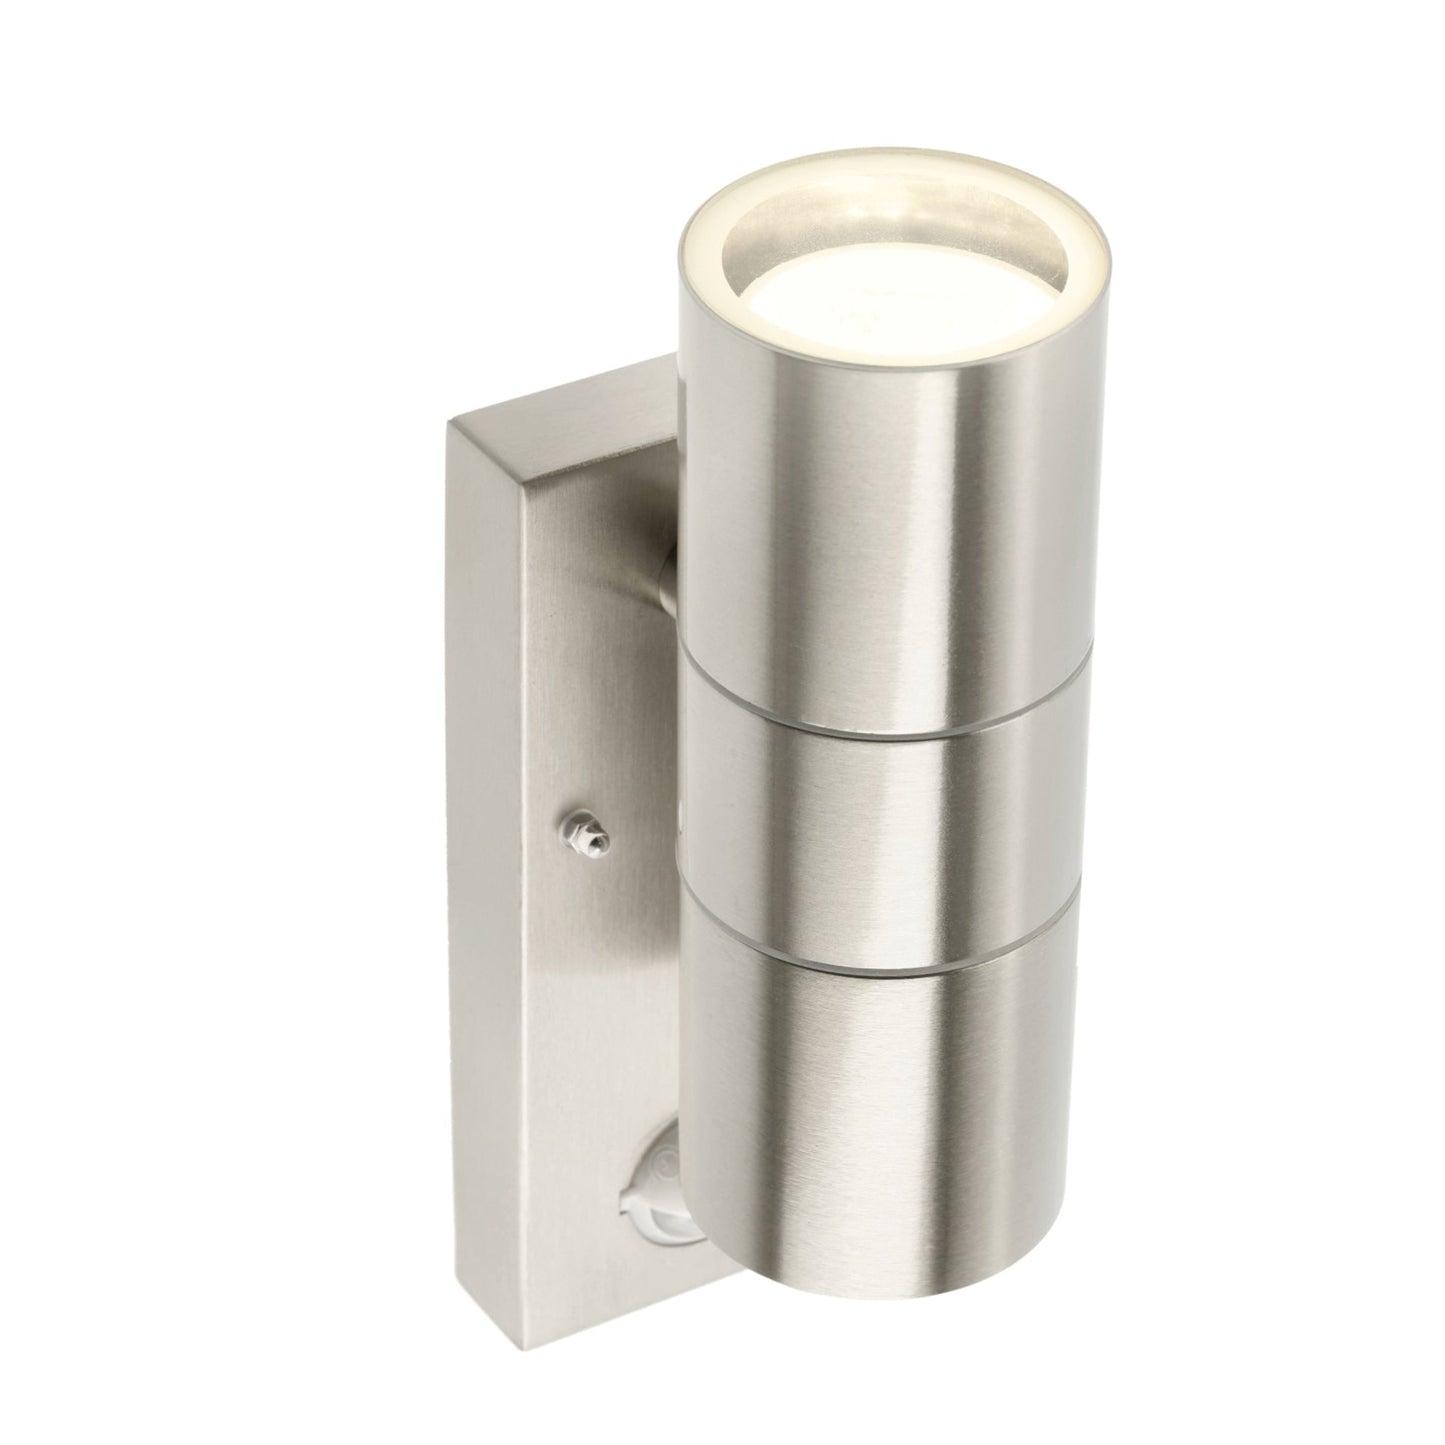 Our Alesha outdoor up and down light is modern and stylish in its appearance.  It comes in a cylinder design mounted on a rectangle back plate complete with clear glass diffusers and built in PIR motion sensor. It is designed for durability and longevity with its robust material producing a fully weatherproof and water resistant light fitting